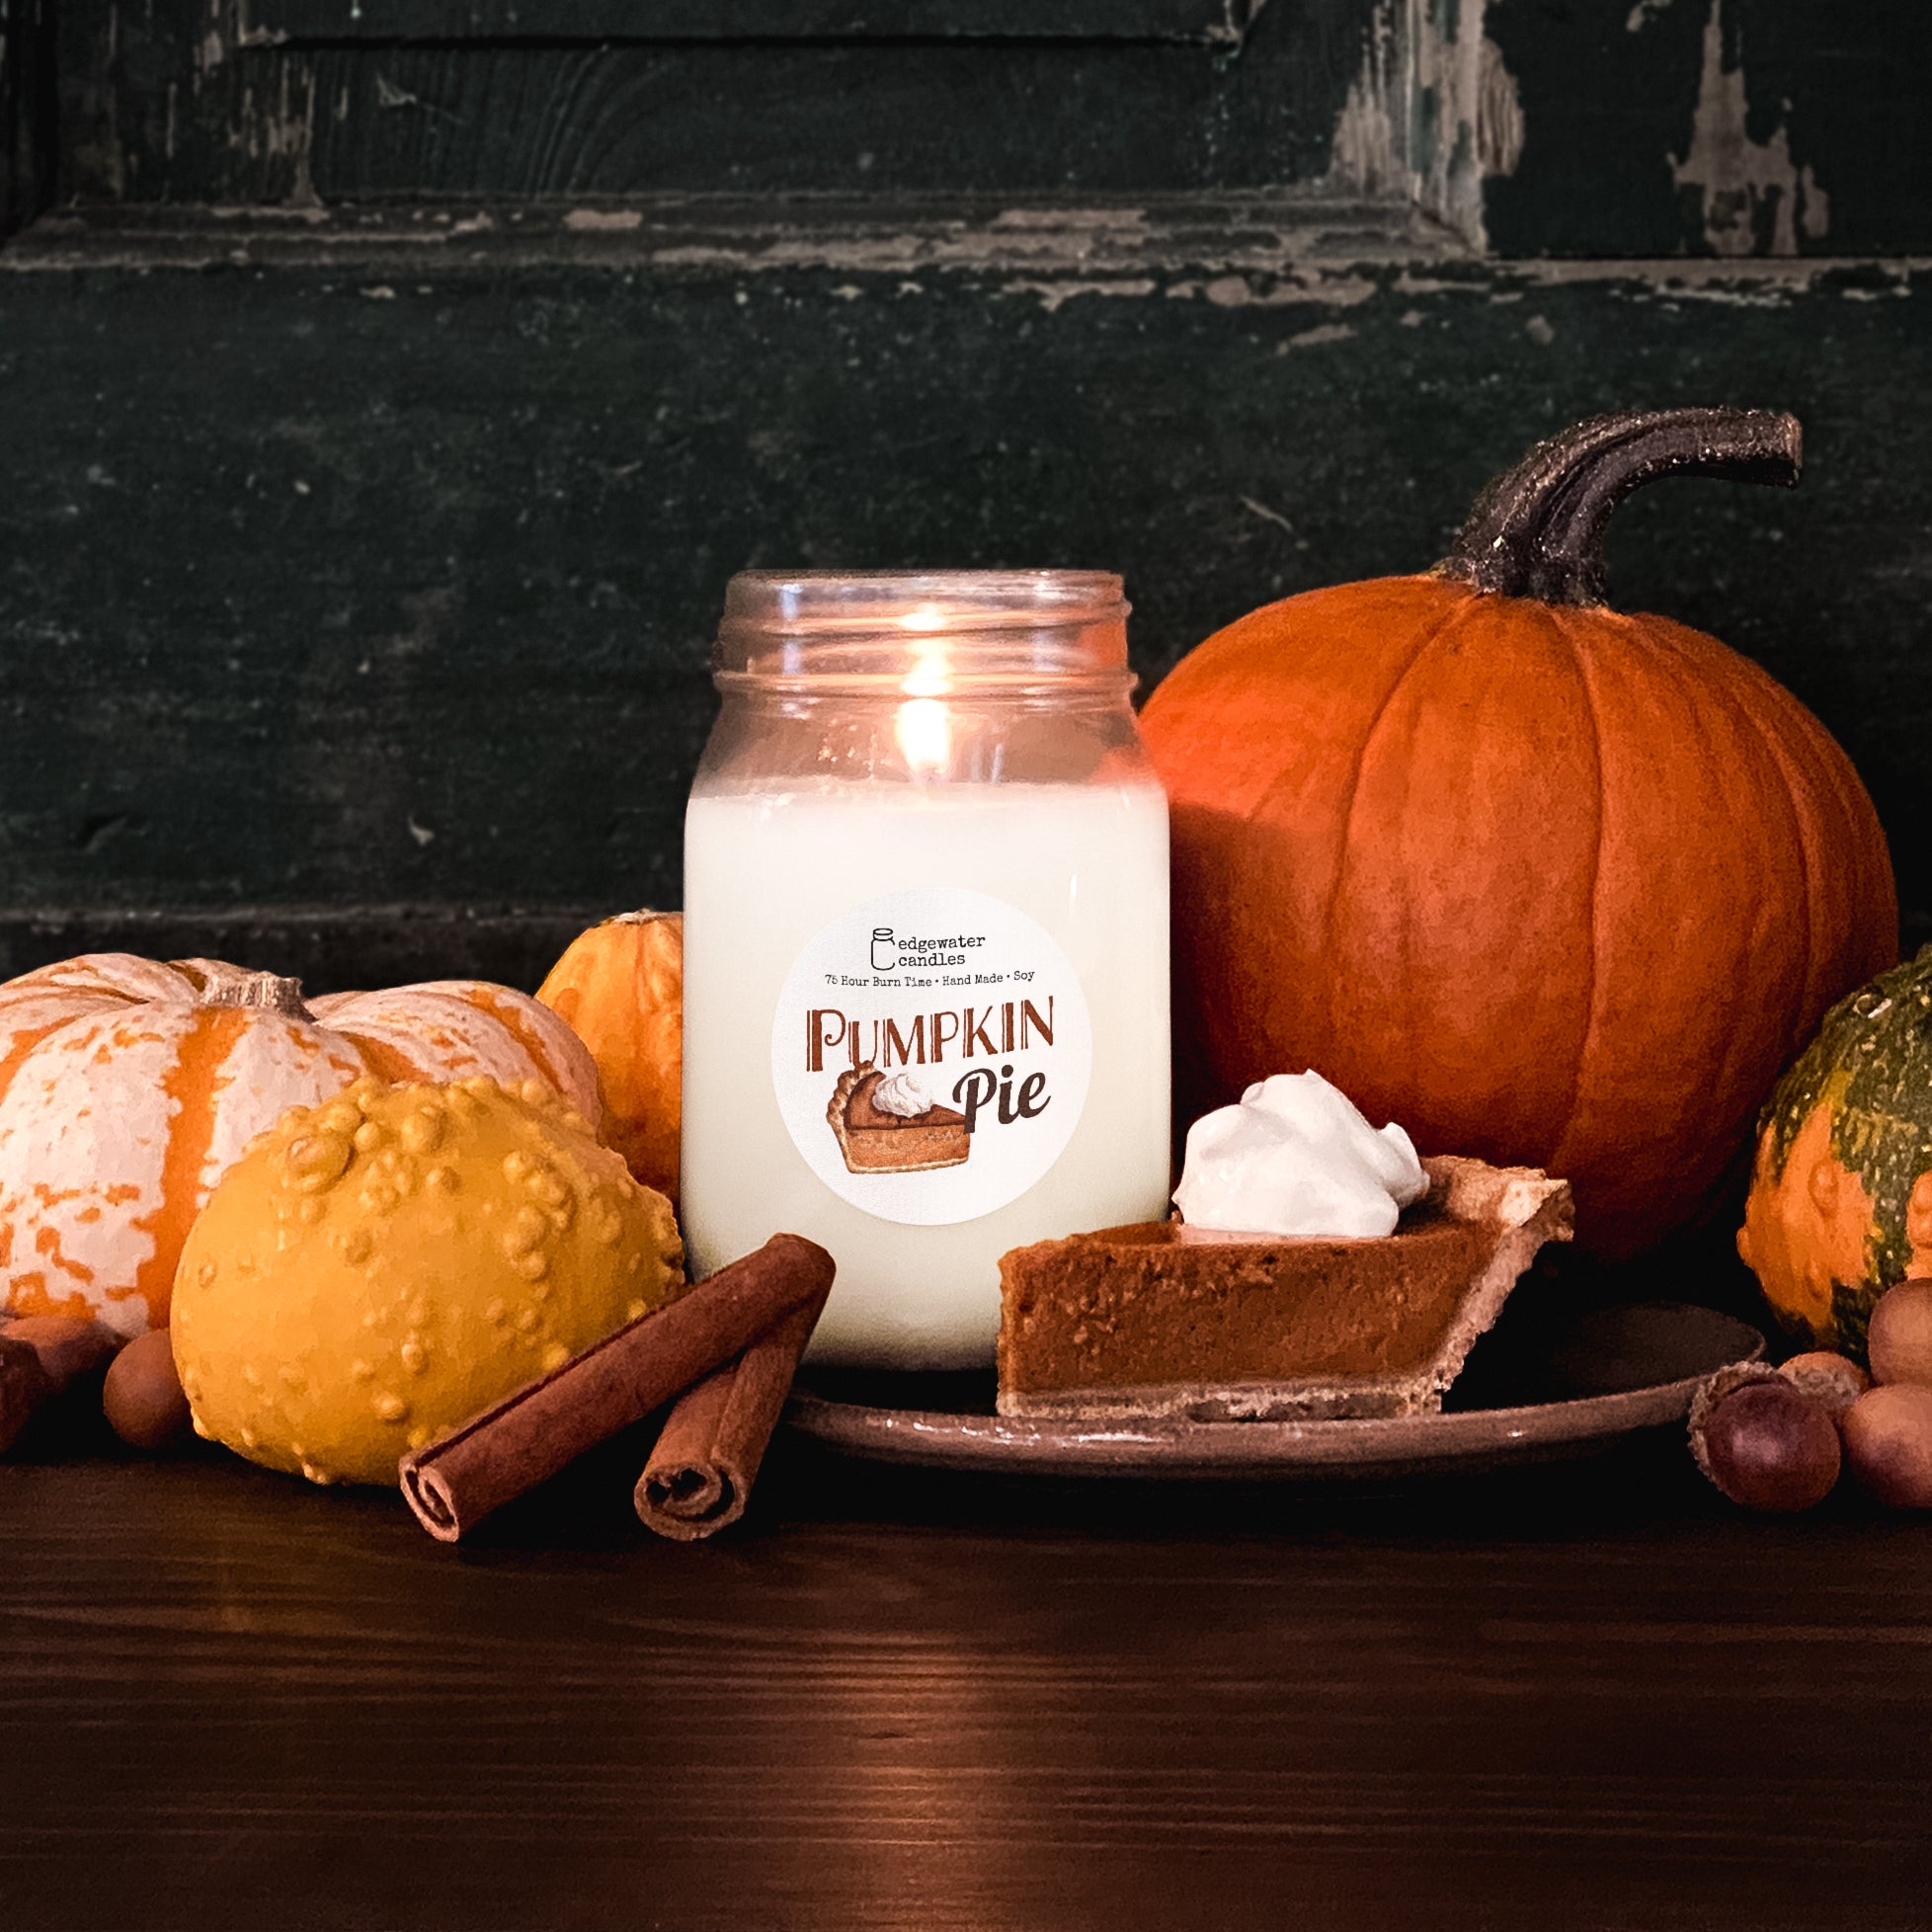 Our Limited Edition Pumpkin Pie candle benefits the Chicago Food Depository.